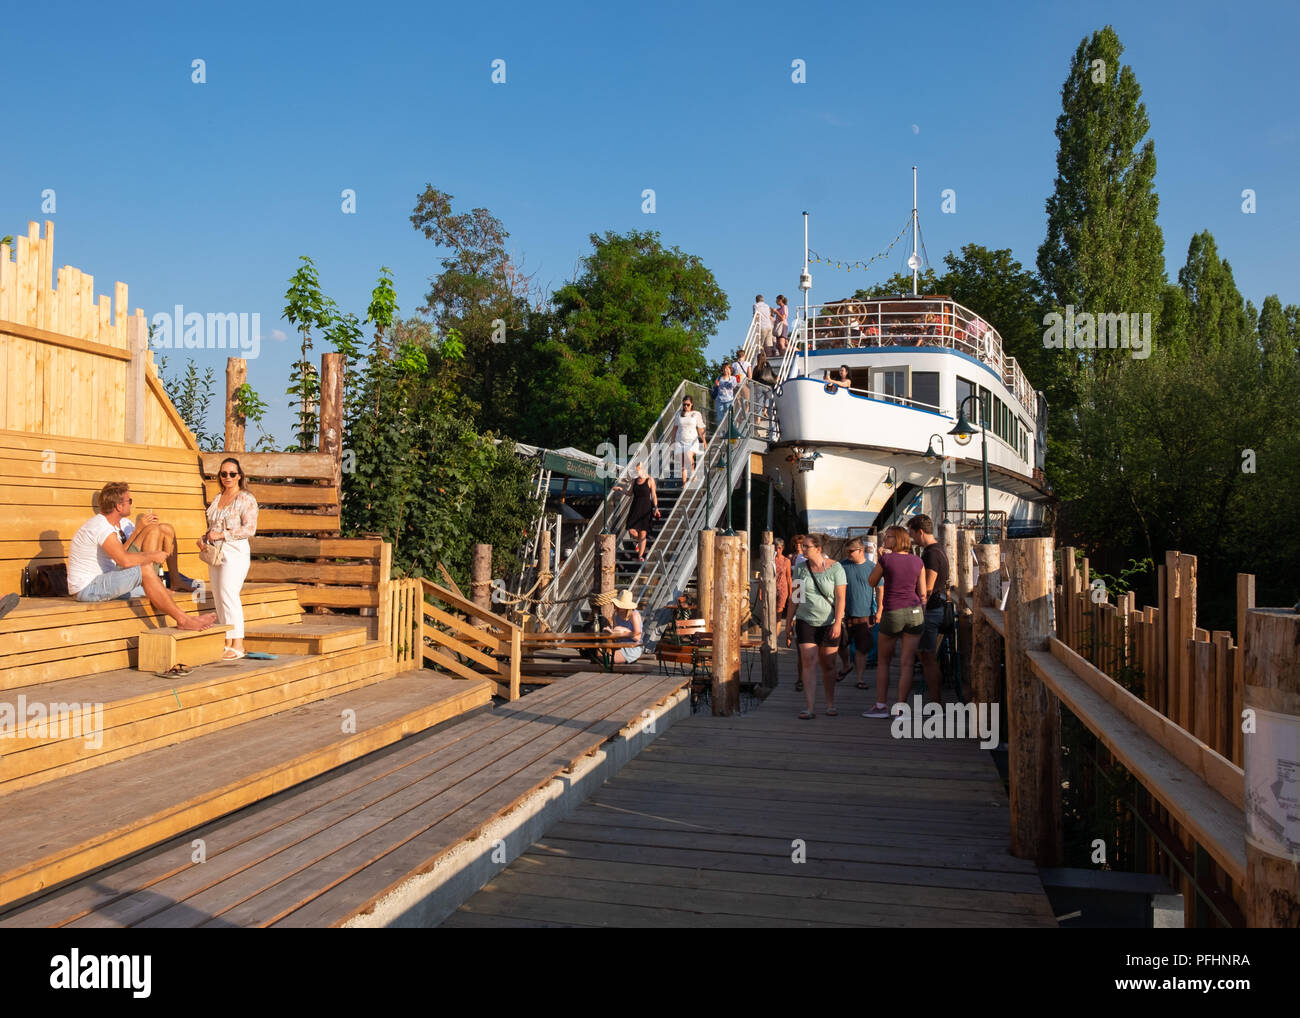 Alte Utting, former  passenger ship converted to a restaurant now placed on a railway bridge in Munich,Germany. Stock Photo